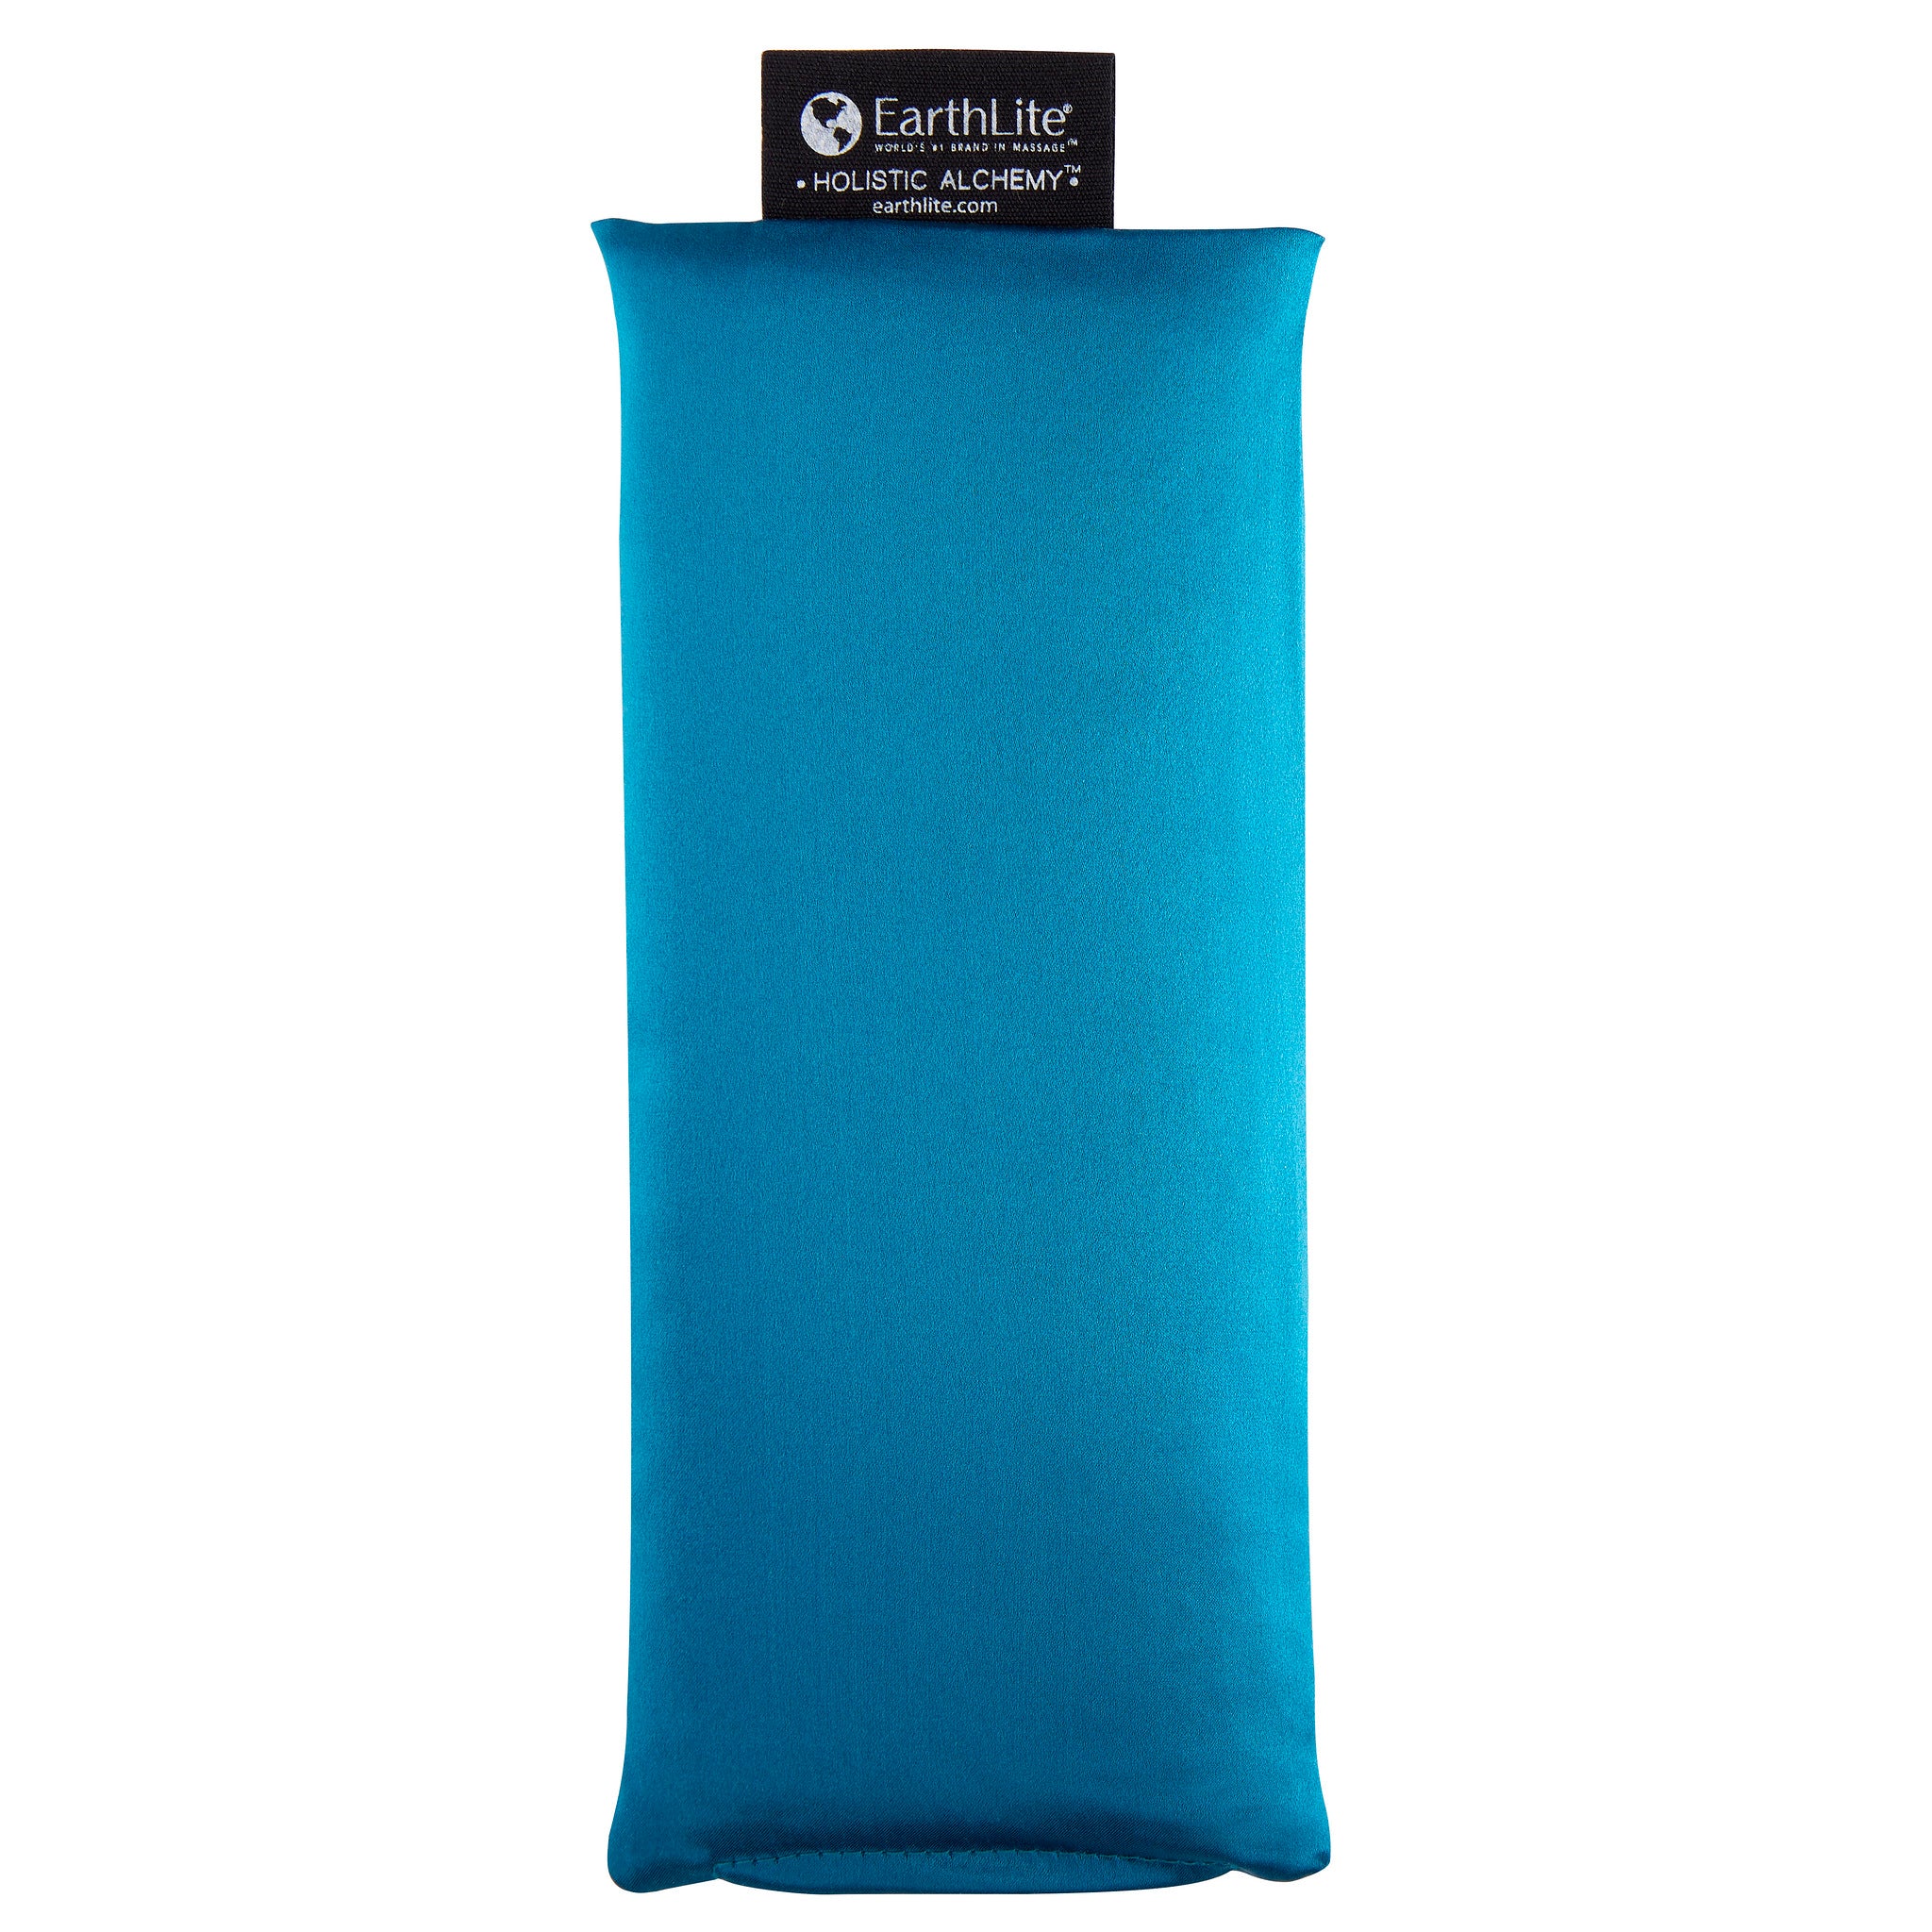 EarthLite Holistic Alchemy™ Therapeutic Eye Pillow Teal Blue